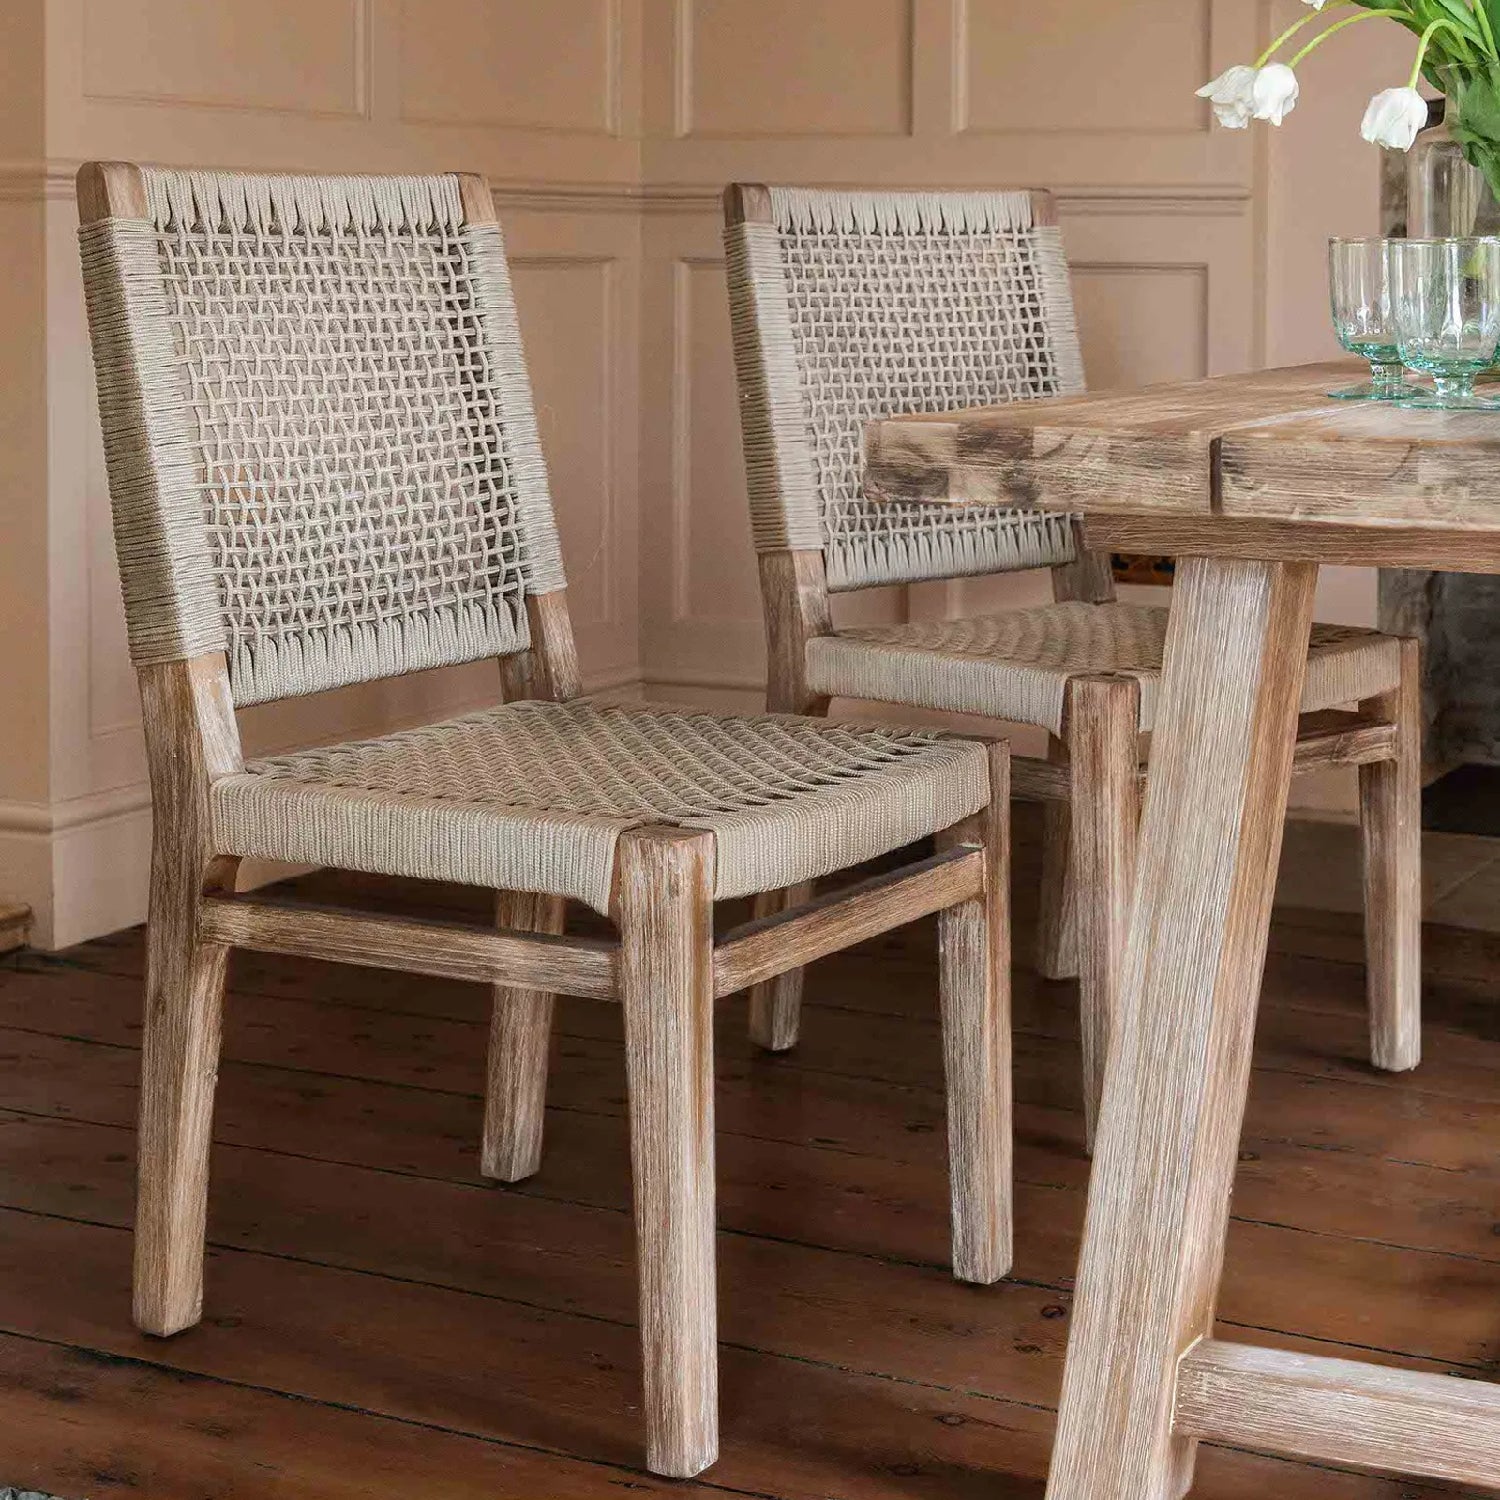 Set of 2 Chilford Weatherproof Dining Chairs